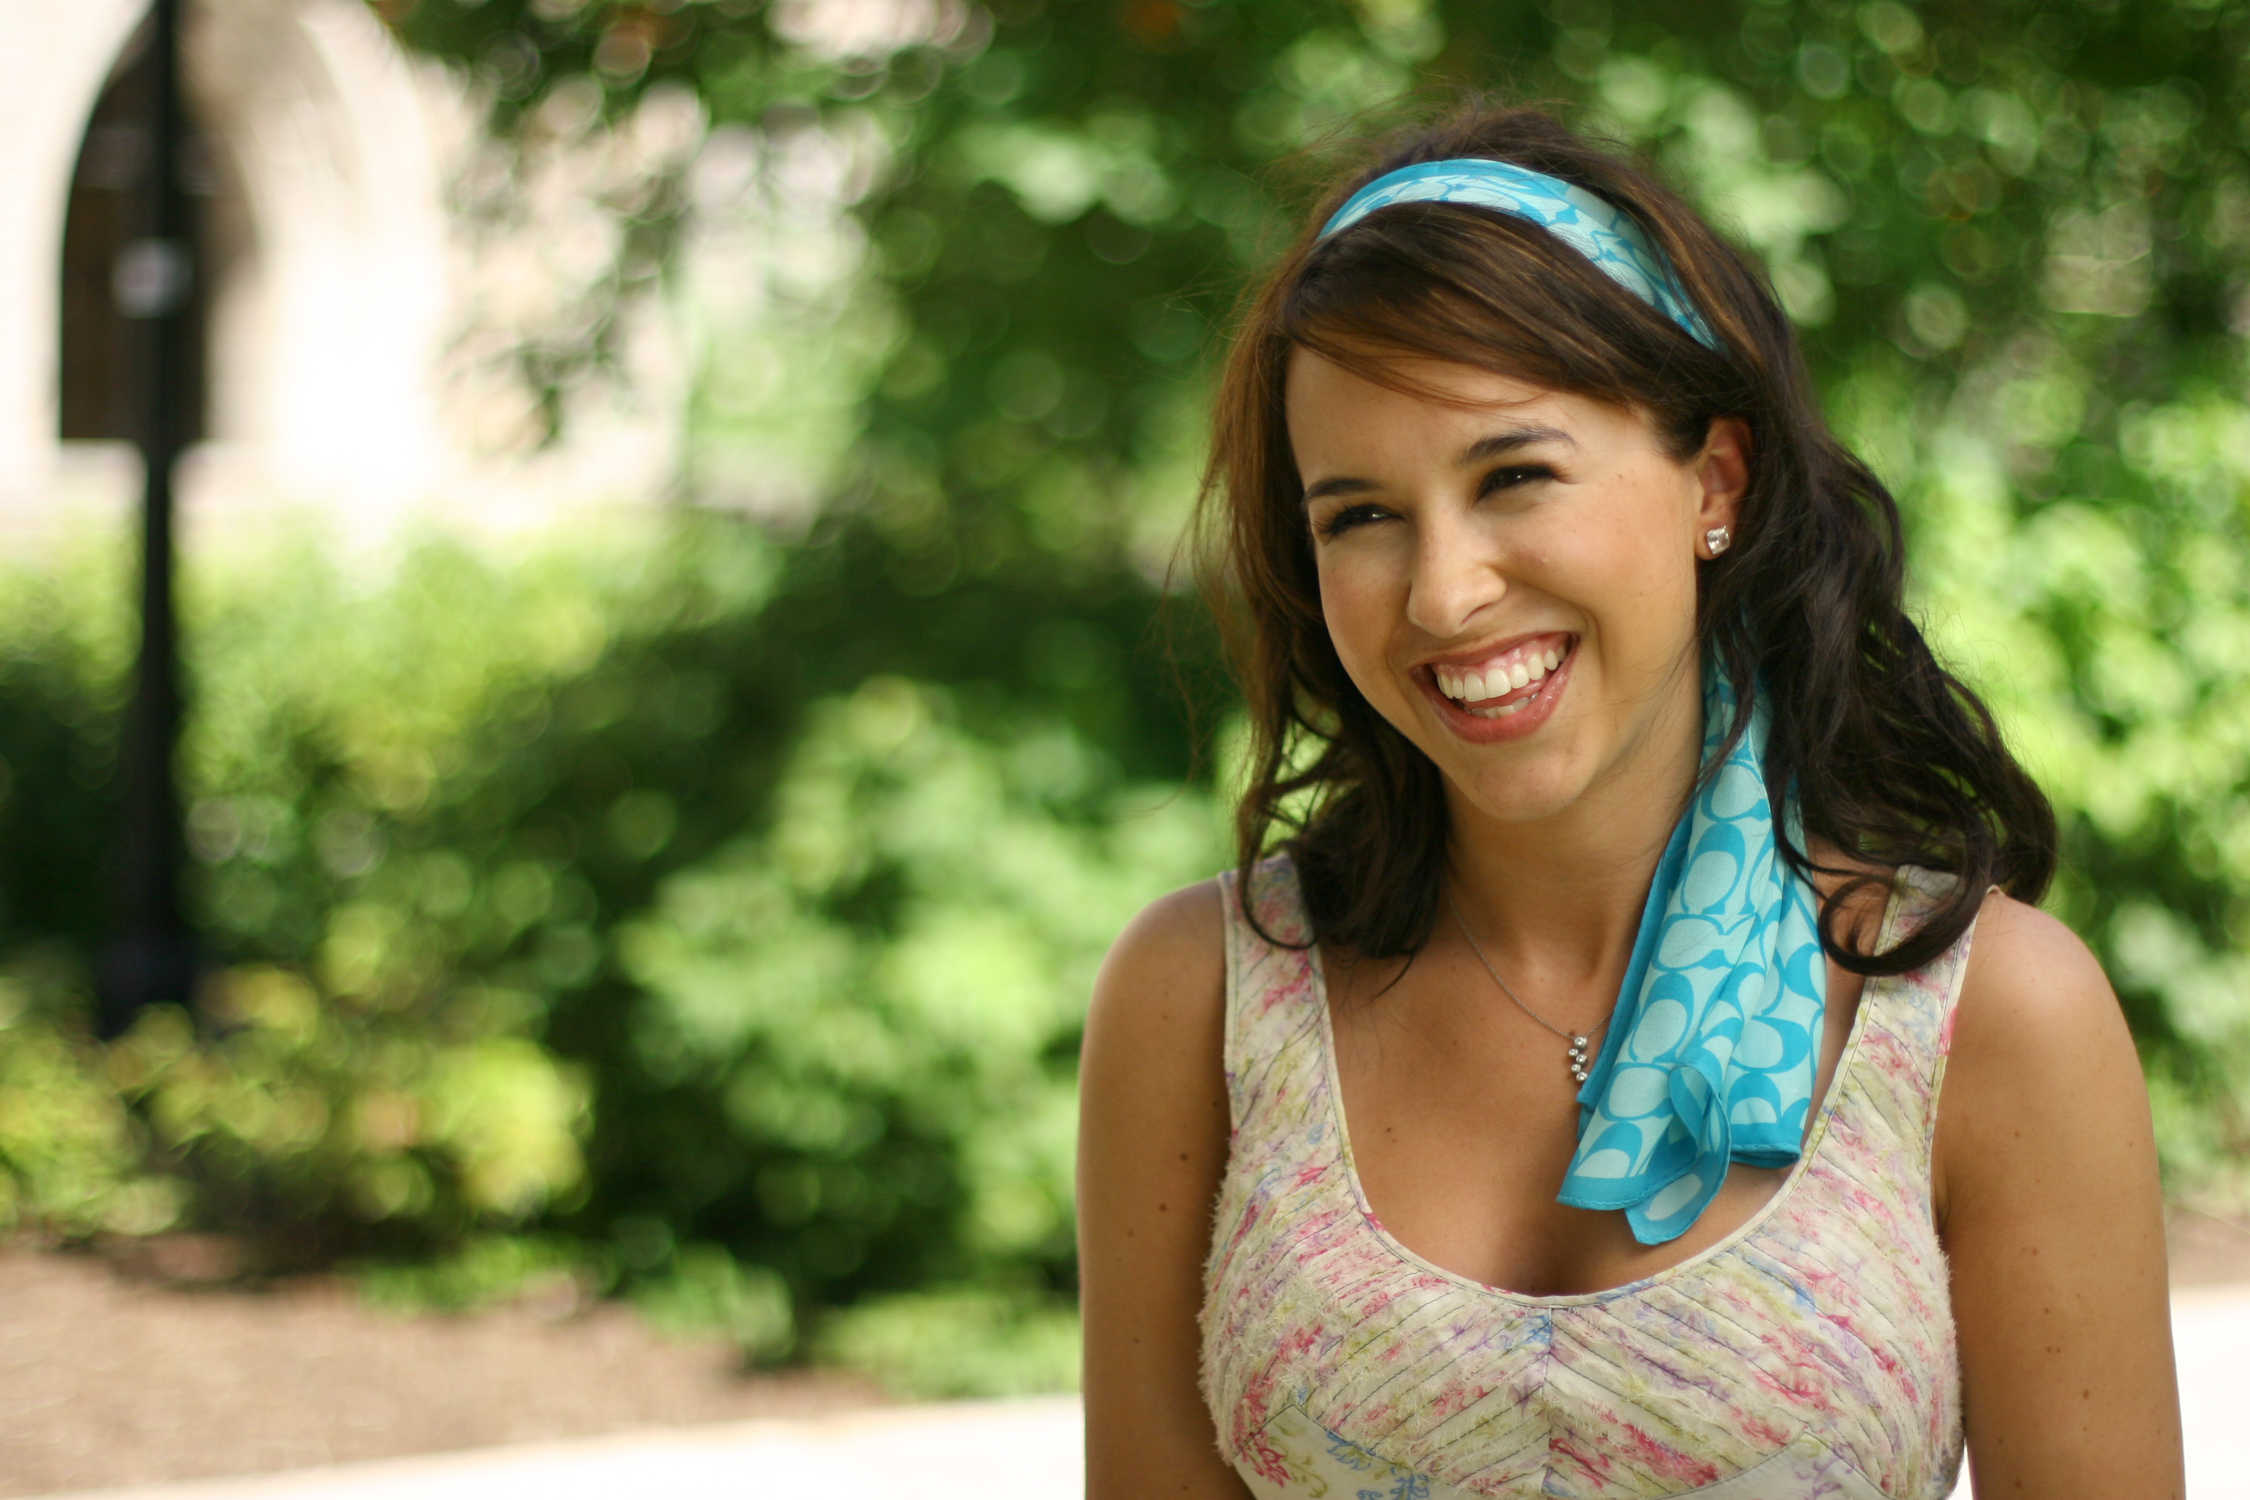 Lacey Chabert stars as marcy in Starry Night Entertainment's Sherman's Way (2009)